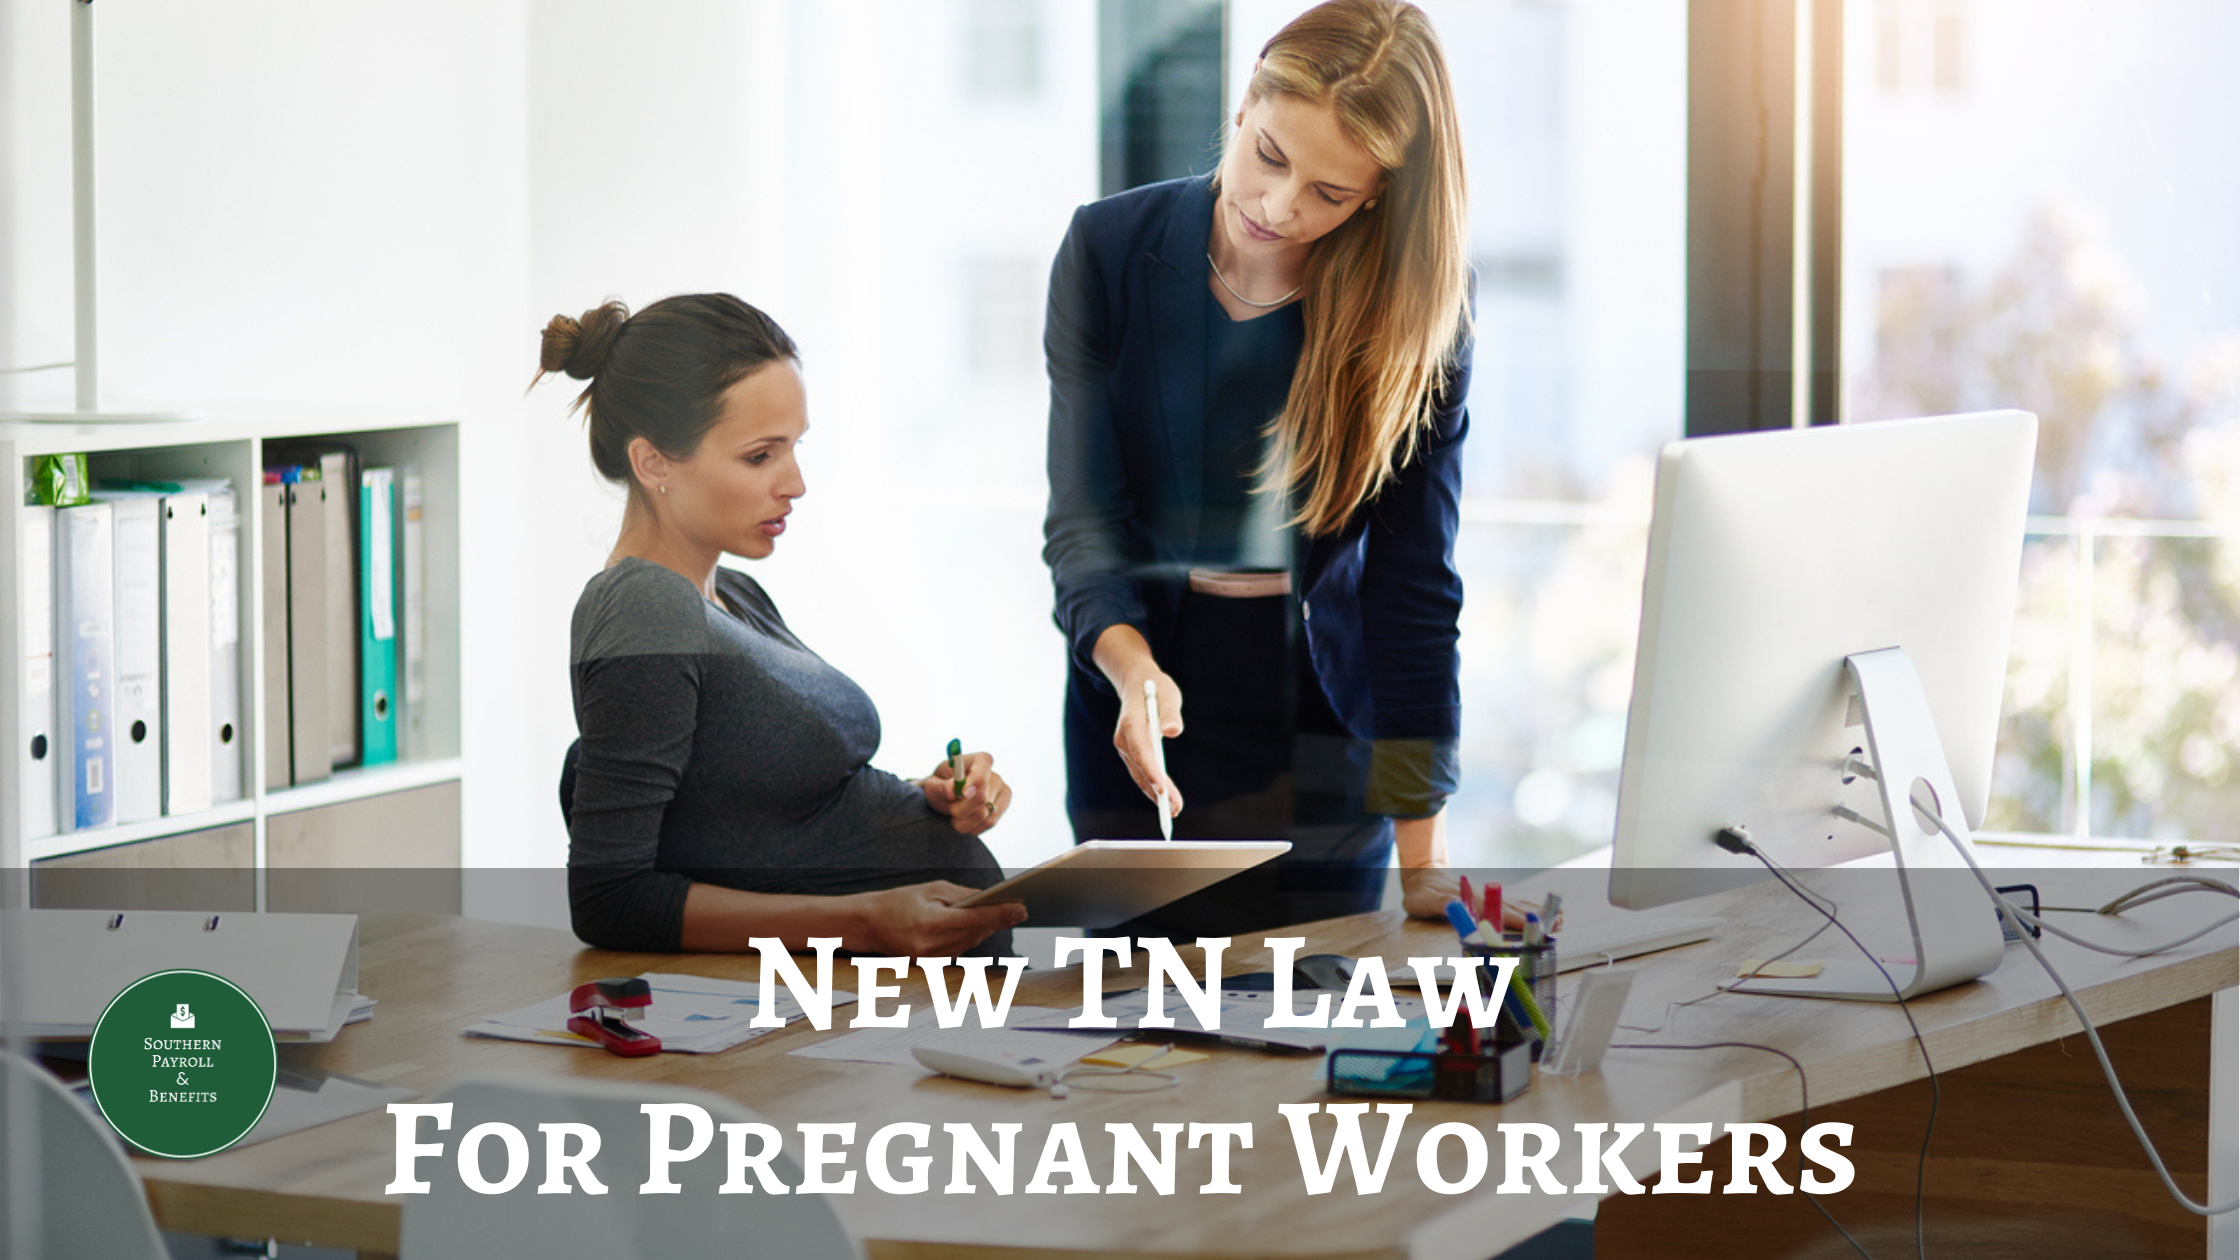 The New TN Law For Pregnant Workers